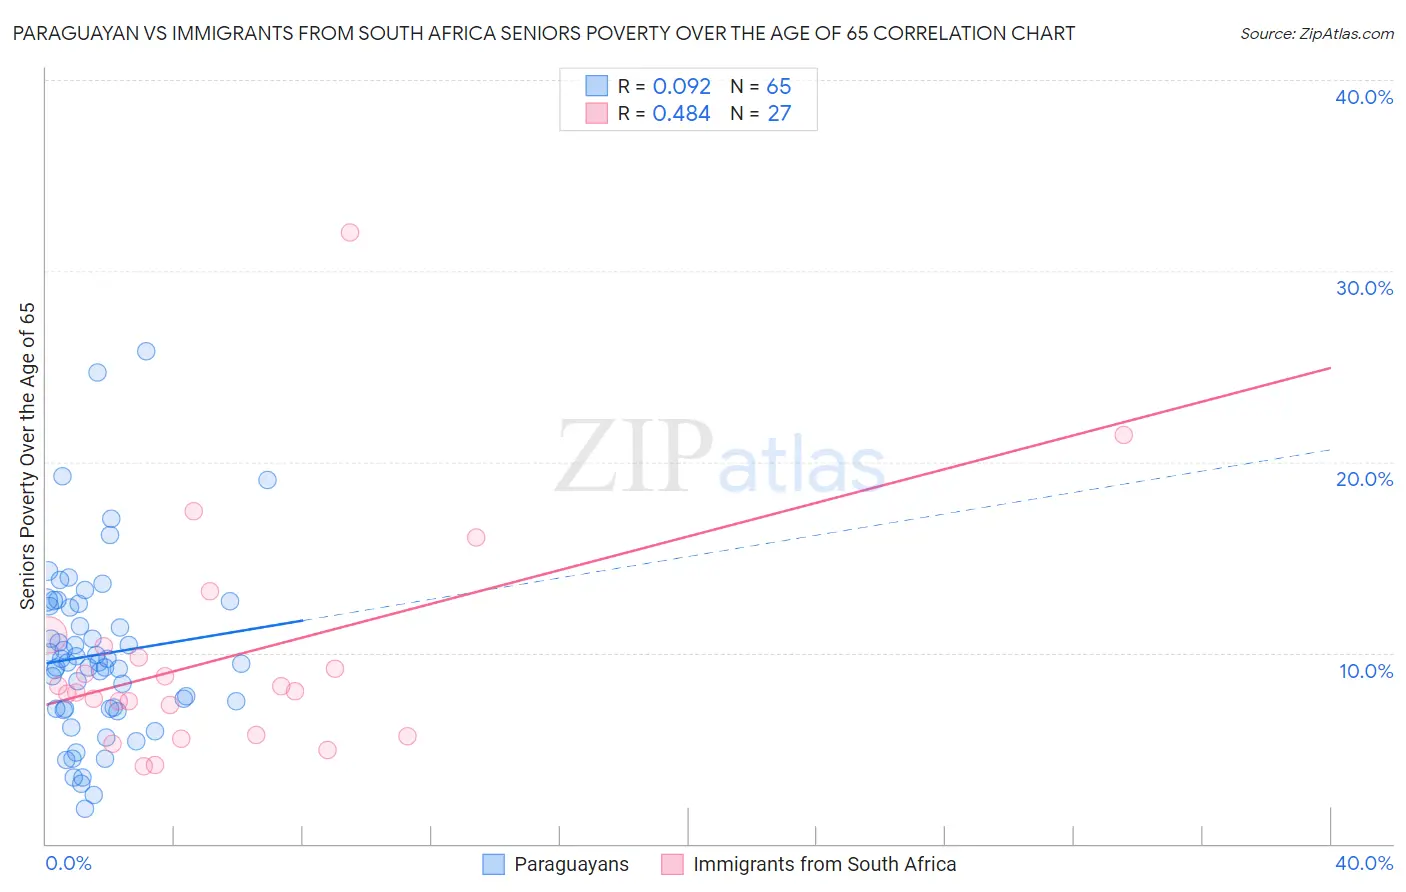 Paraguayan vs Immigrants from South Africa Seniors Poverty Over the Age of 65